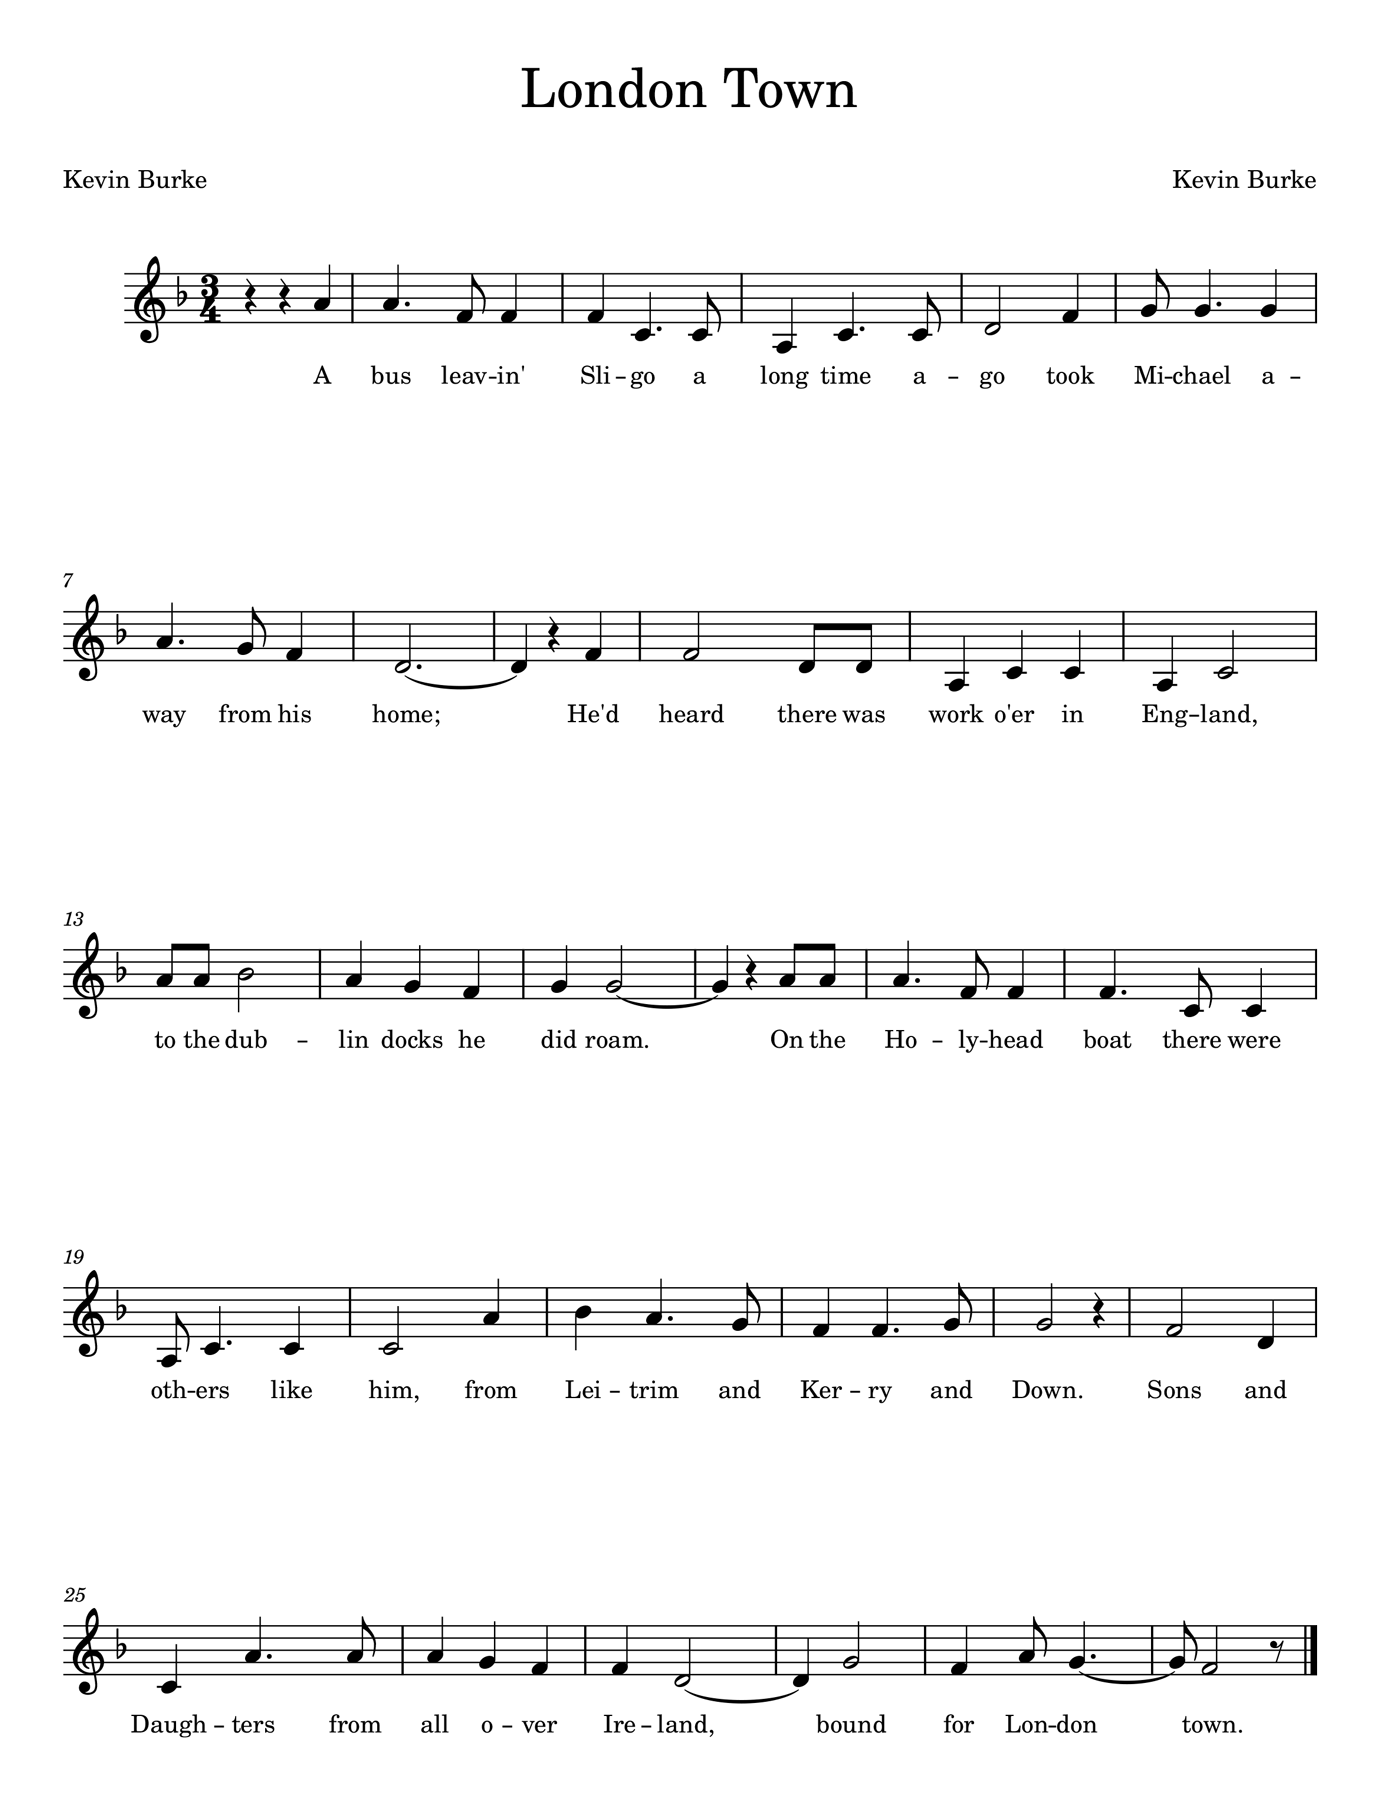 Sheet music for "London Town"